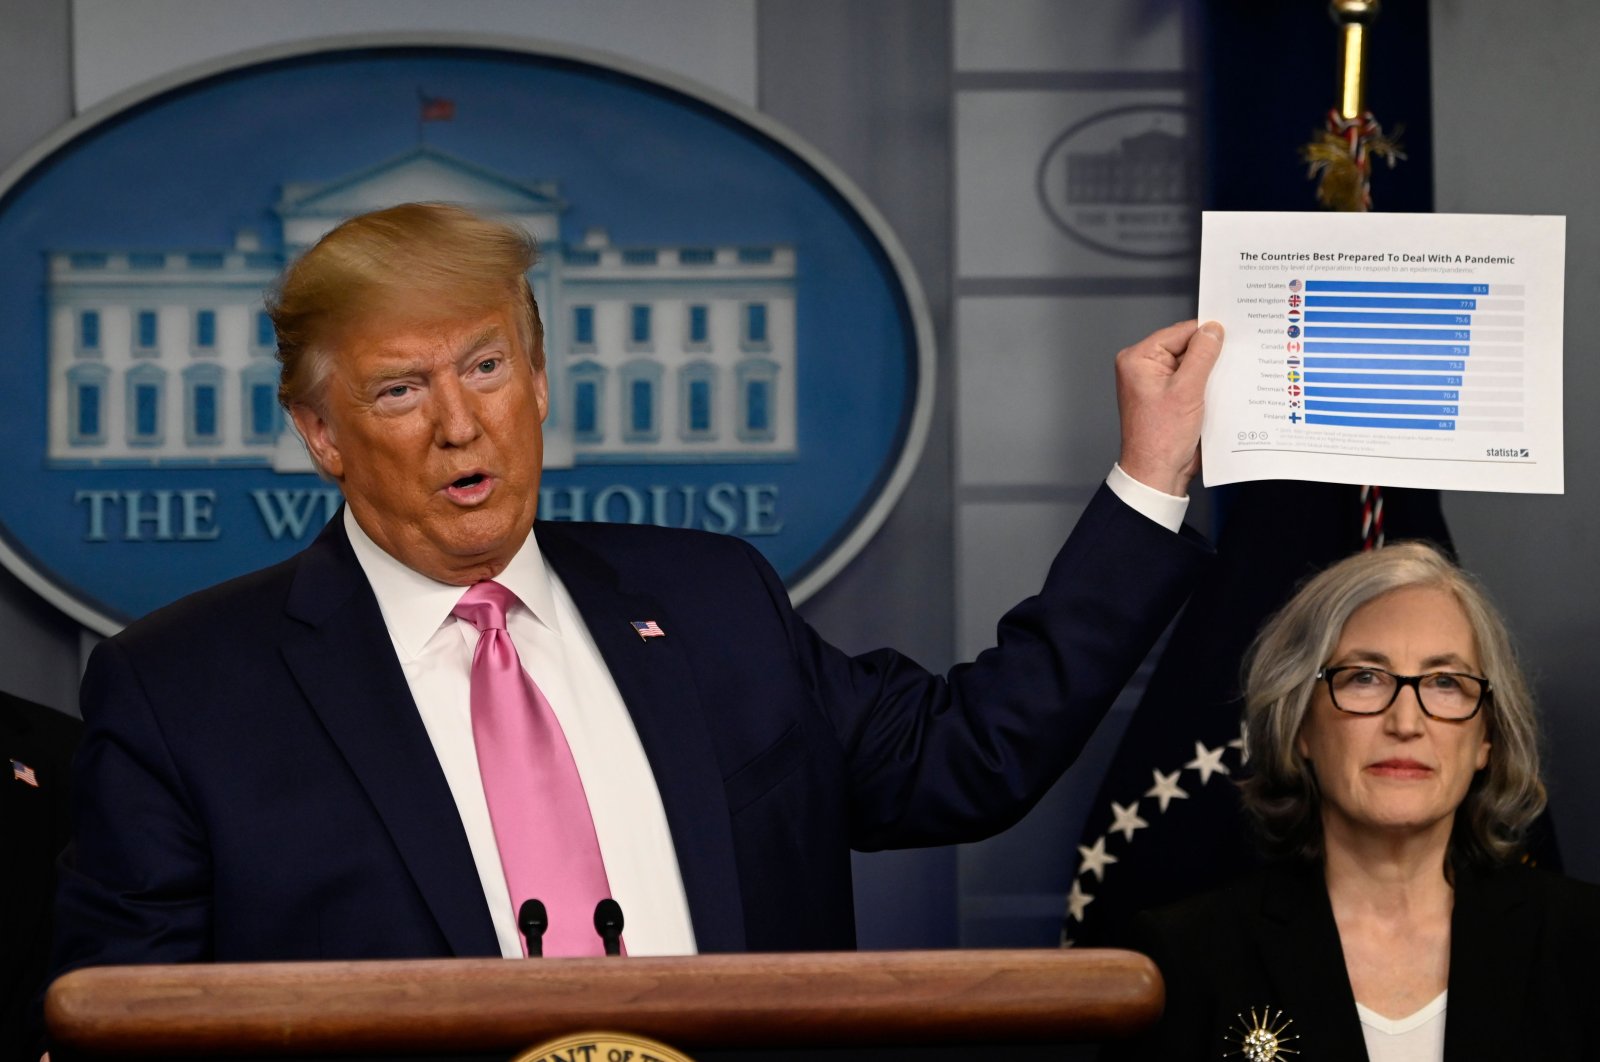 U.S. President Donald Trump (L) speaks at a news conference on the COVID-19 outbreak as Center for Disease Control and Prevention Principal Deputy Director Anne Schuchat looks on at the White House, U.S., Feb. 26, 2020. (AFP Photo)